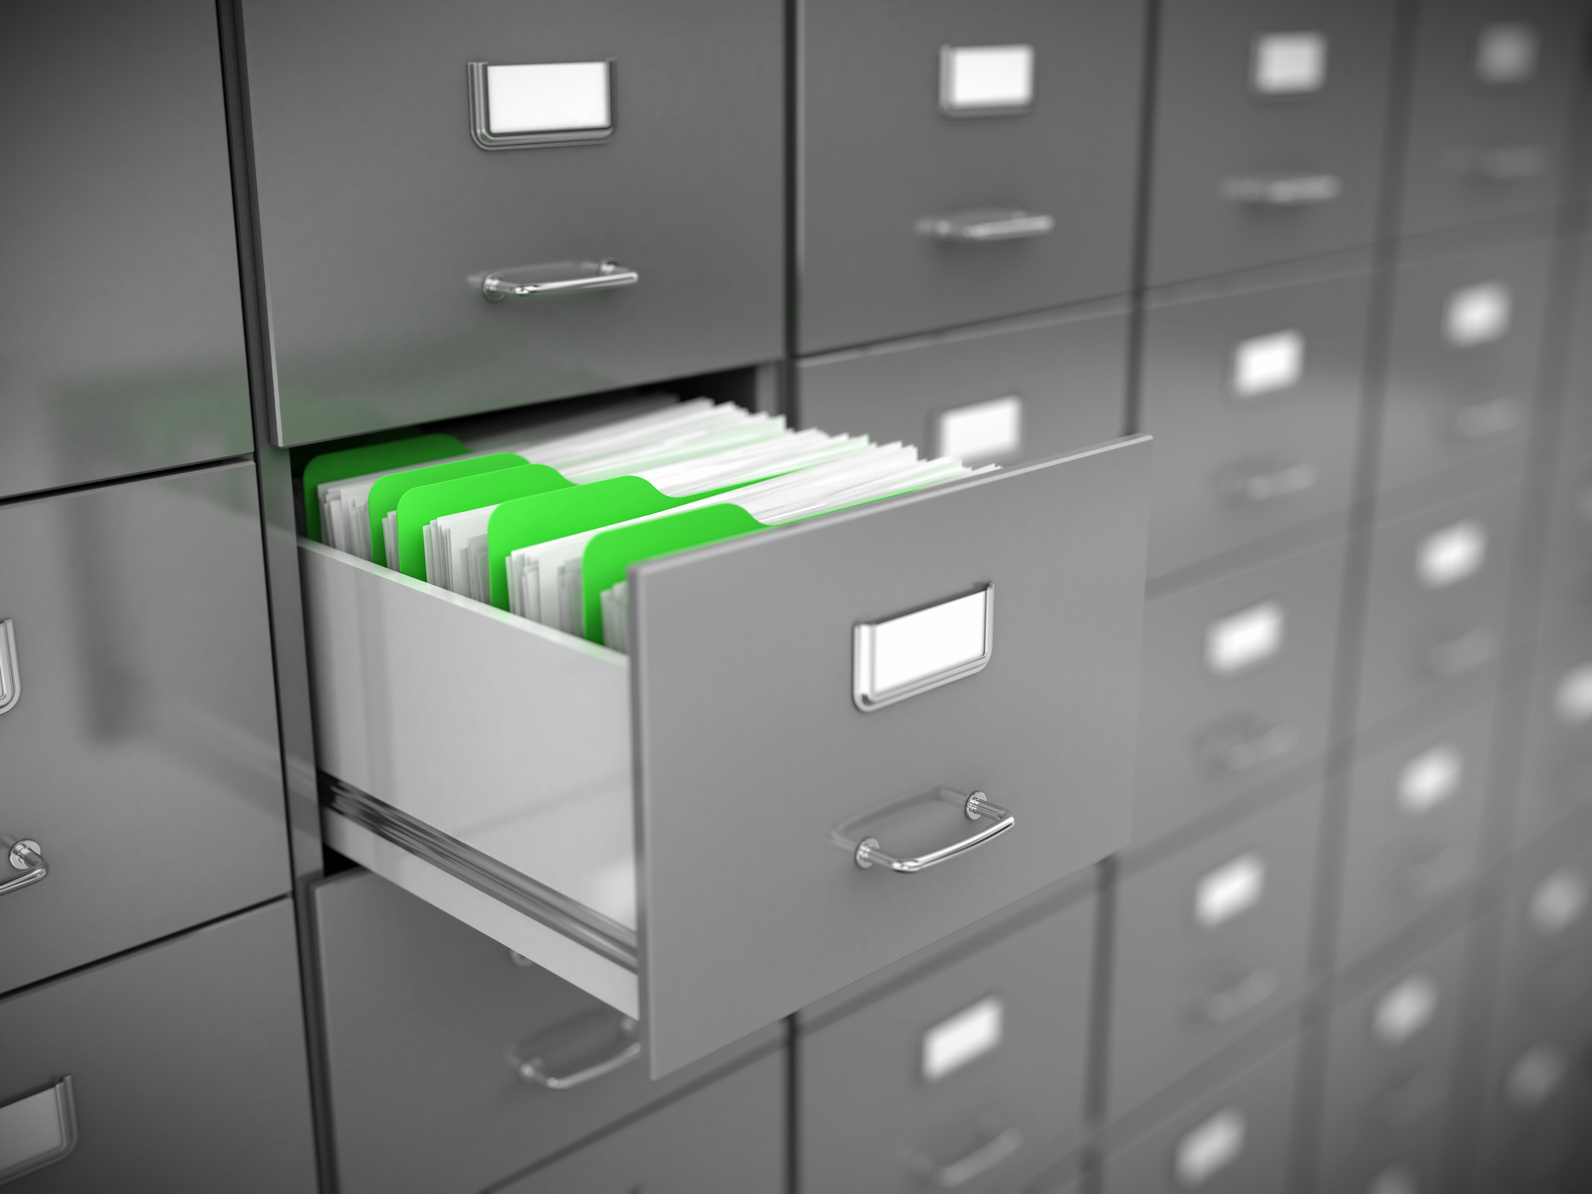 Making the Case for Better Document Management on iOS